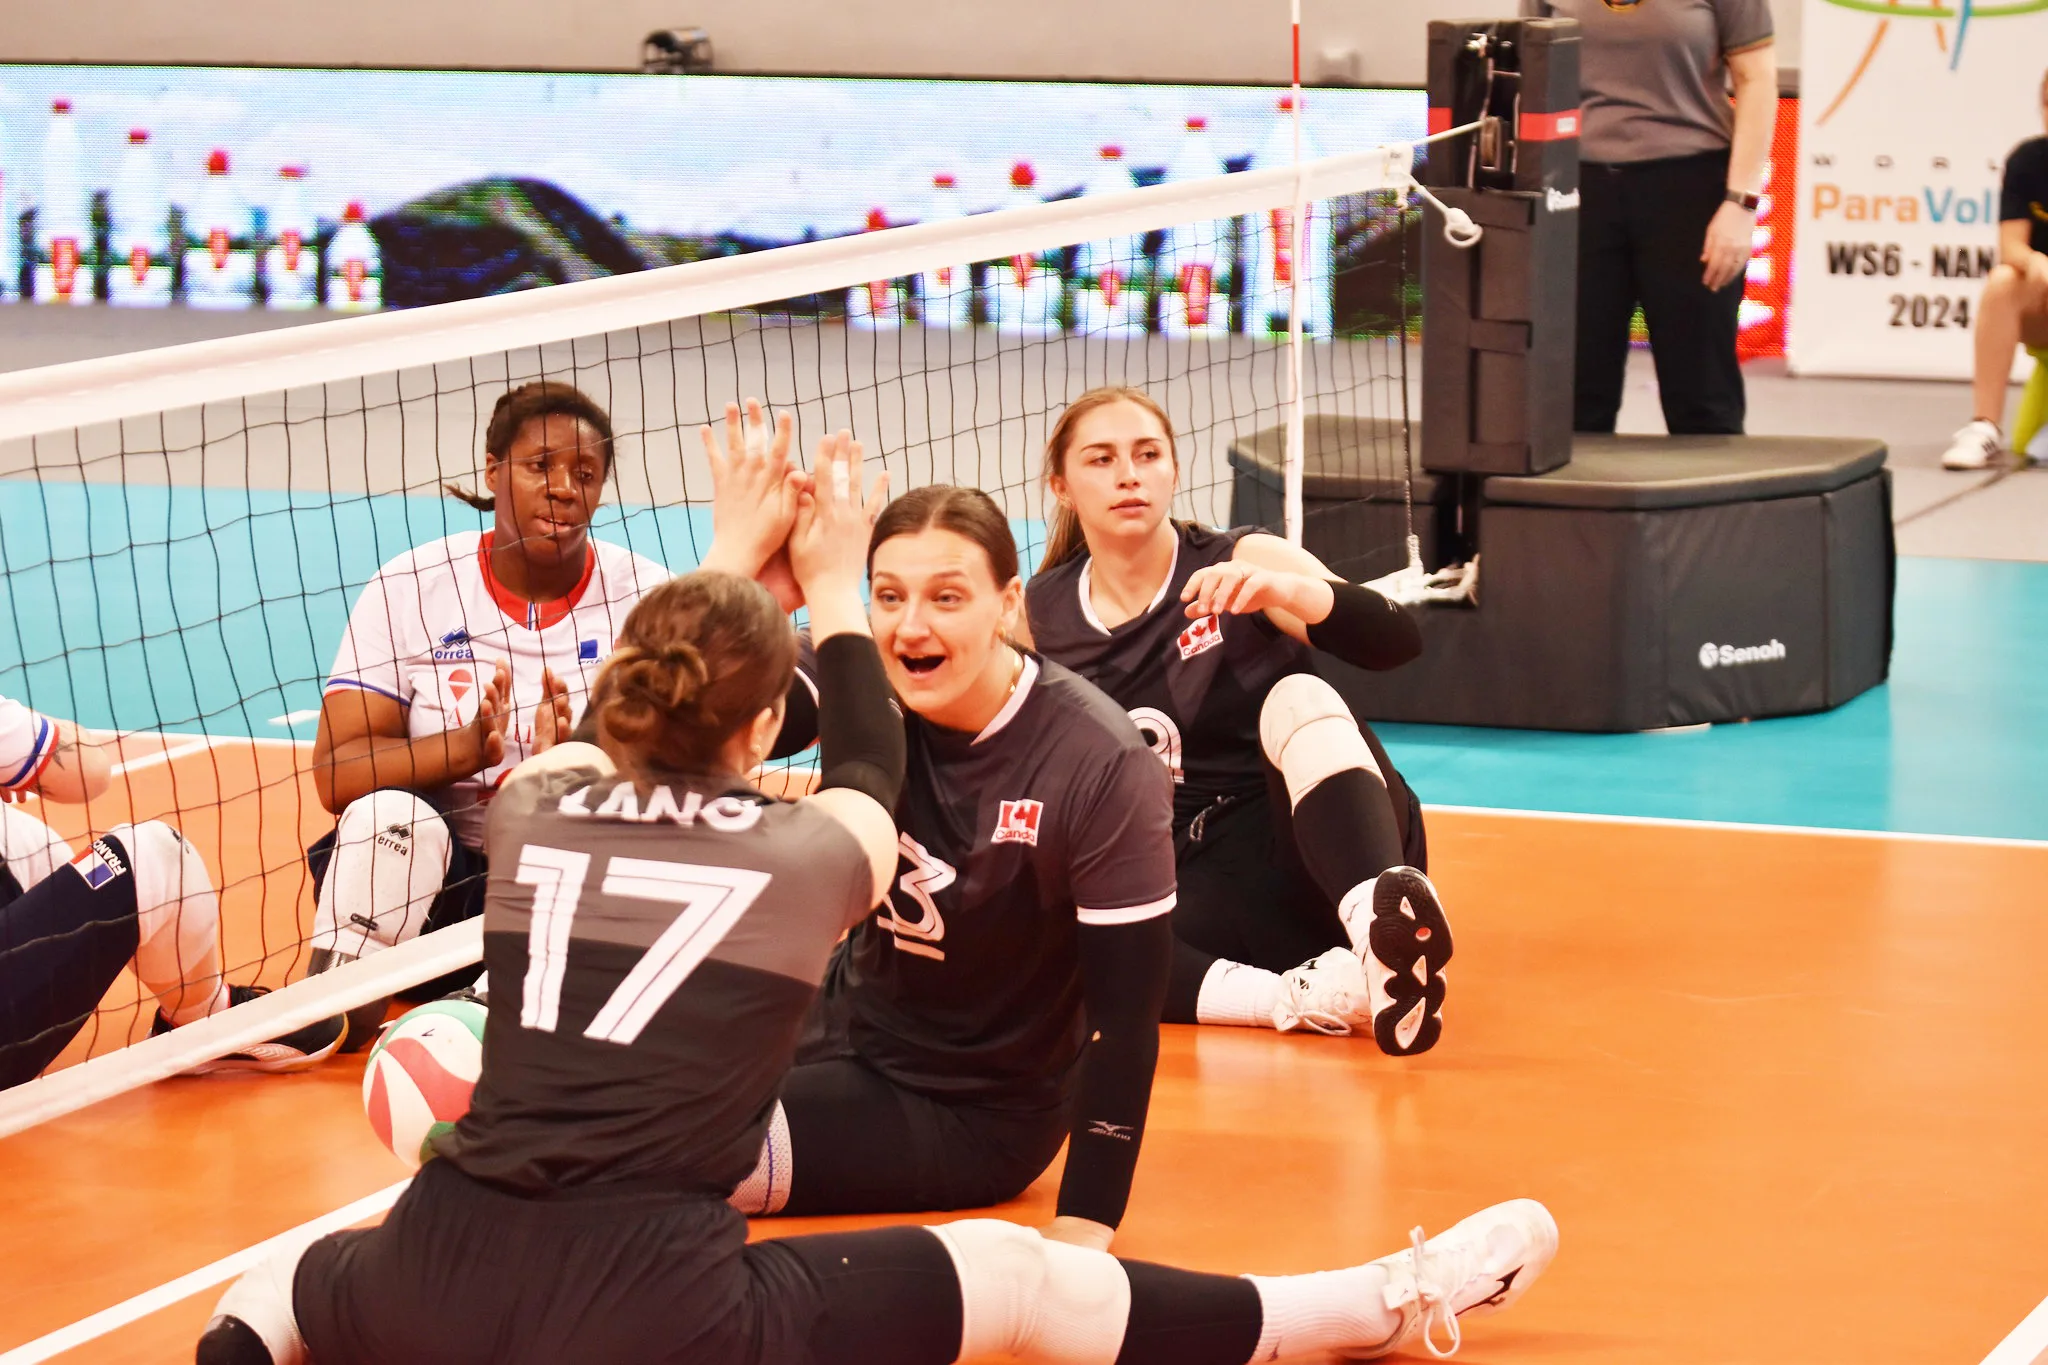 Canada clinch fifth place with straight-set win over hosts France in Nancy Canada clinch fifth place with straight-set win over hosts France in Nancy